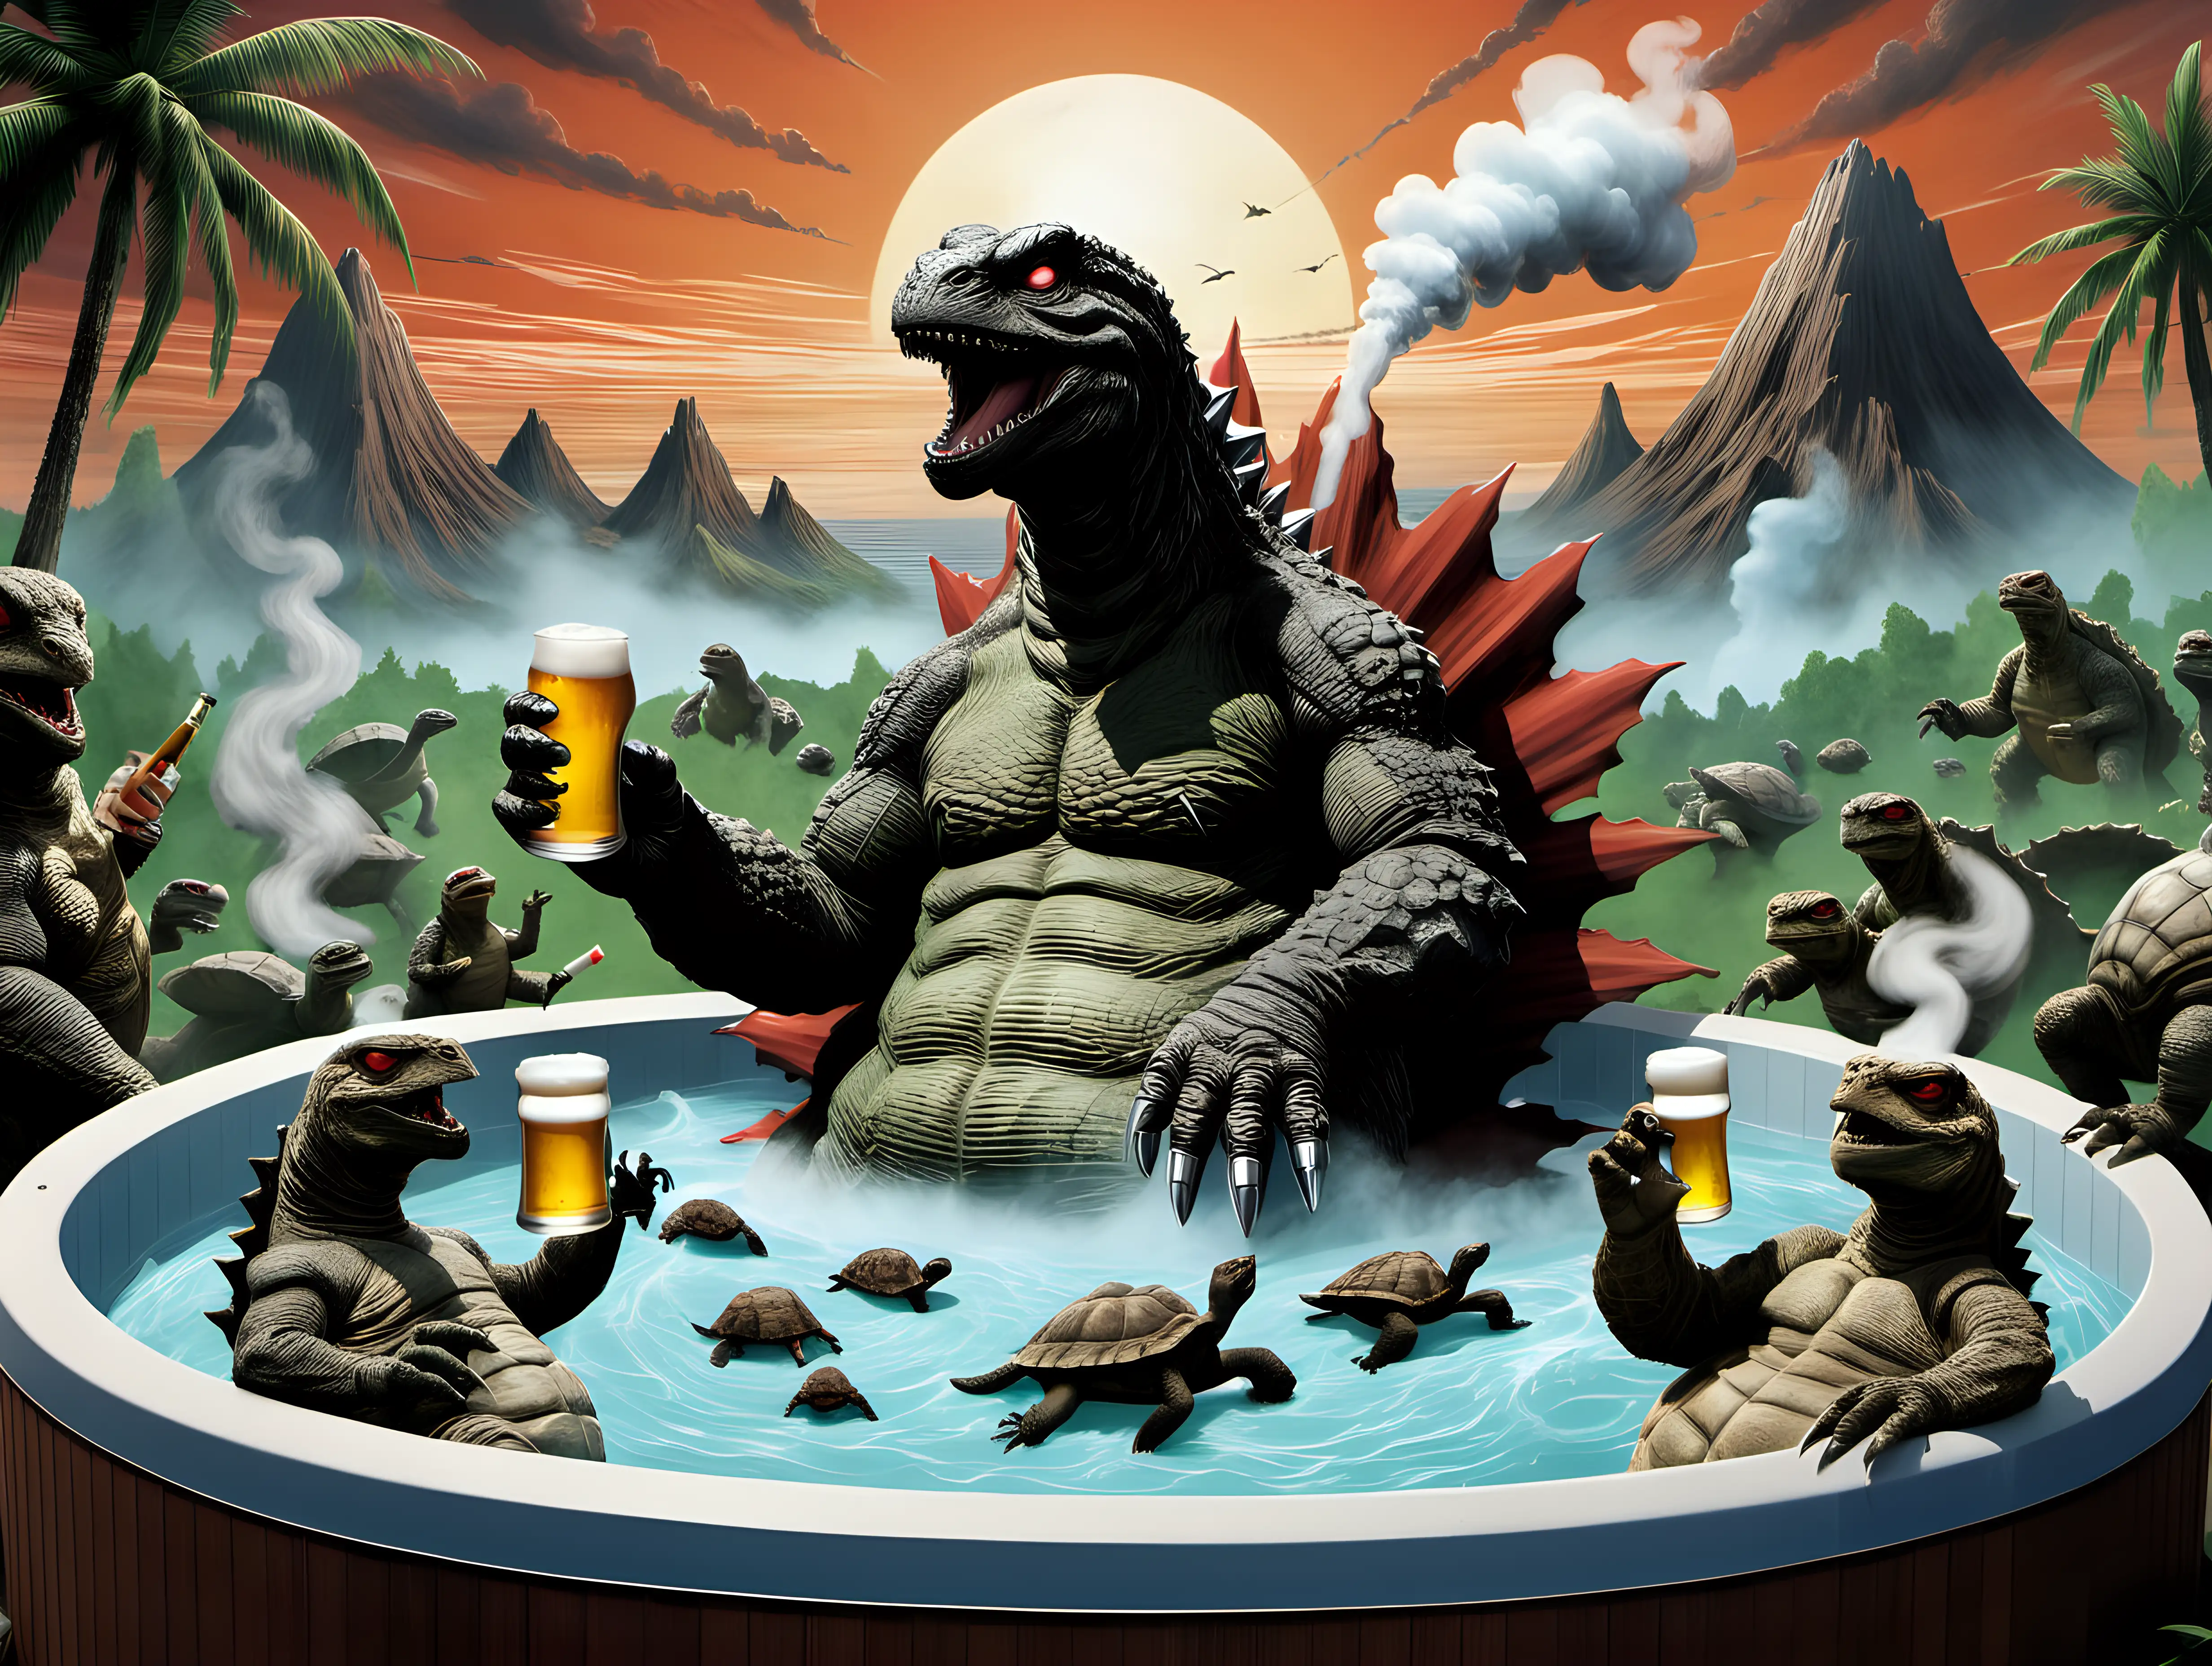 Giant Godzilla Relaxing in Hot Tub with Tortoises Enjoying Beer and Joint